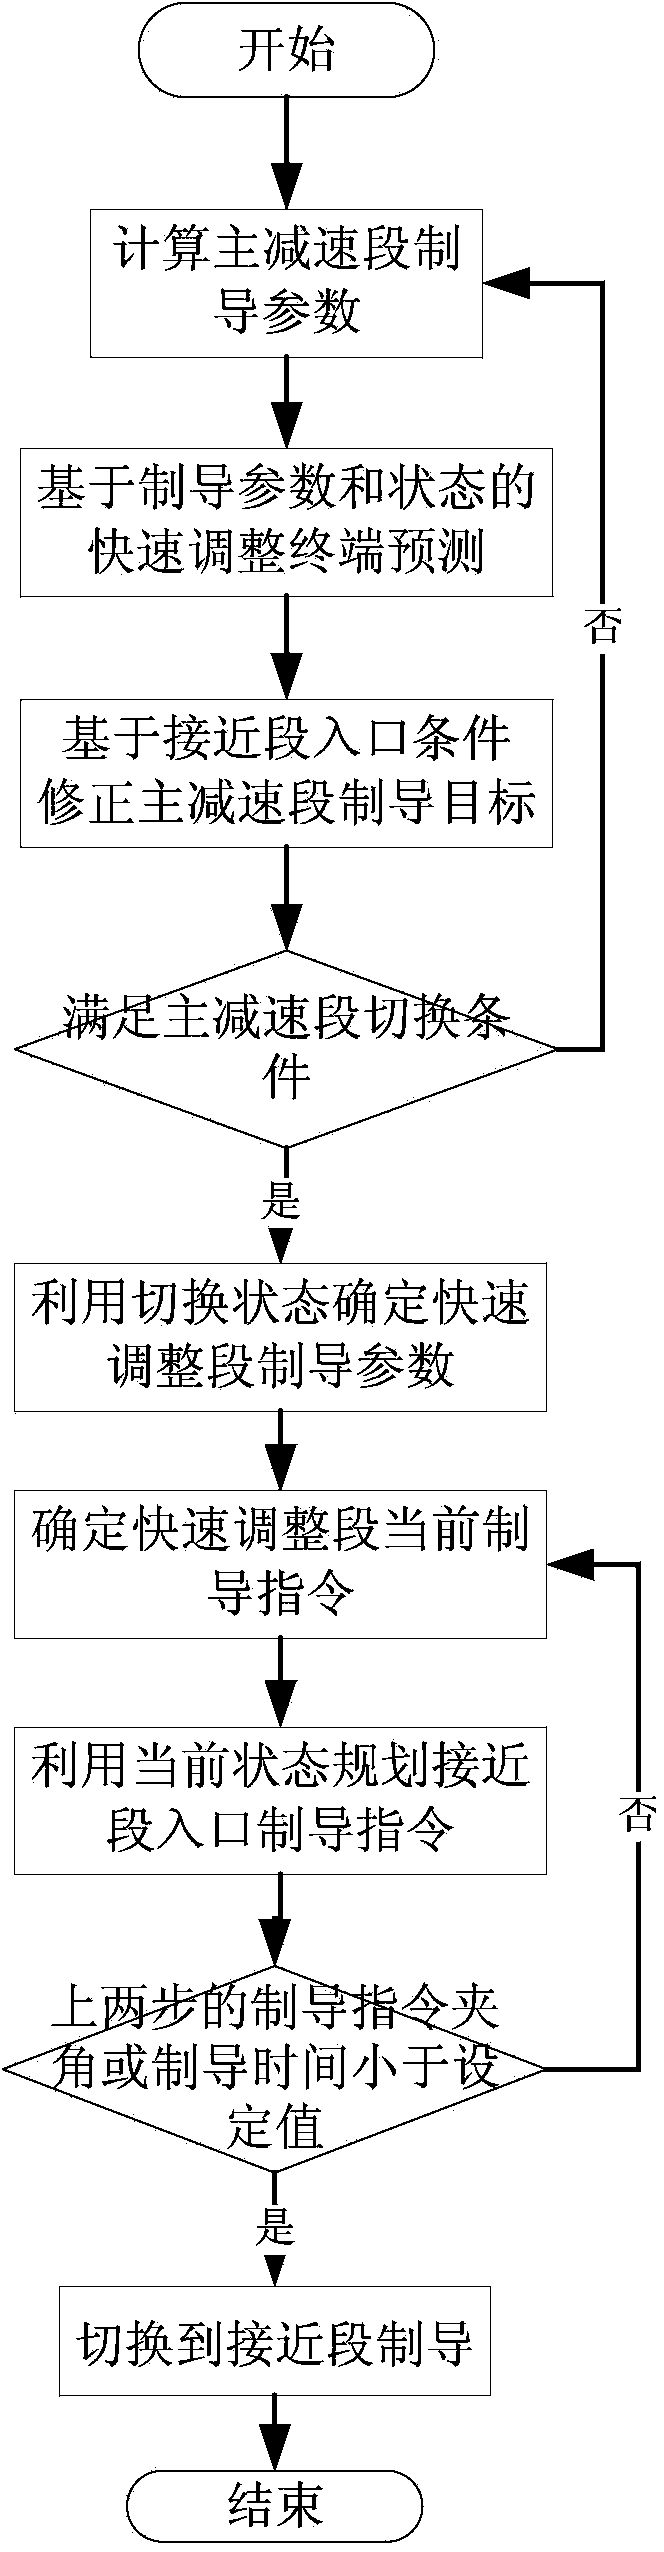 Forecasting and correcting method for joining main deceleration stage and approaching stage